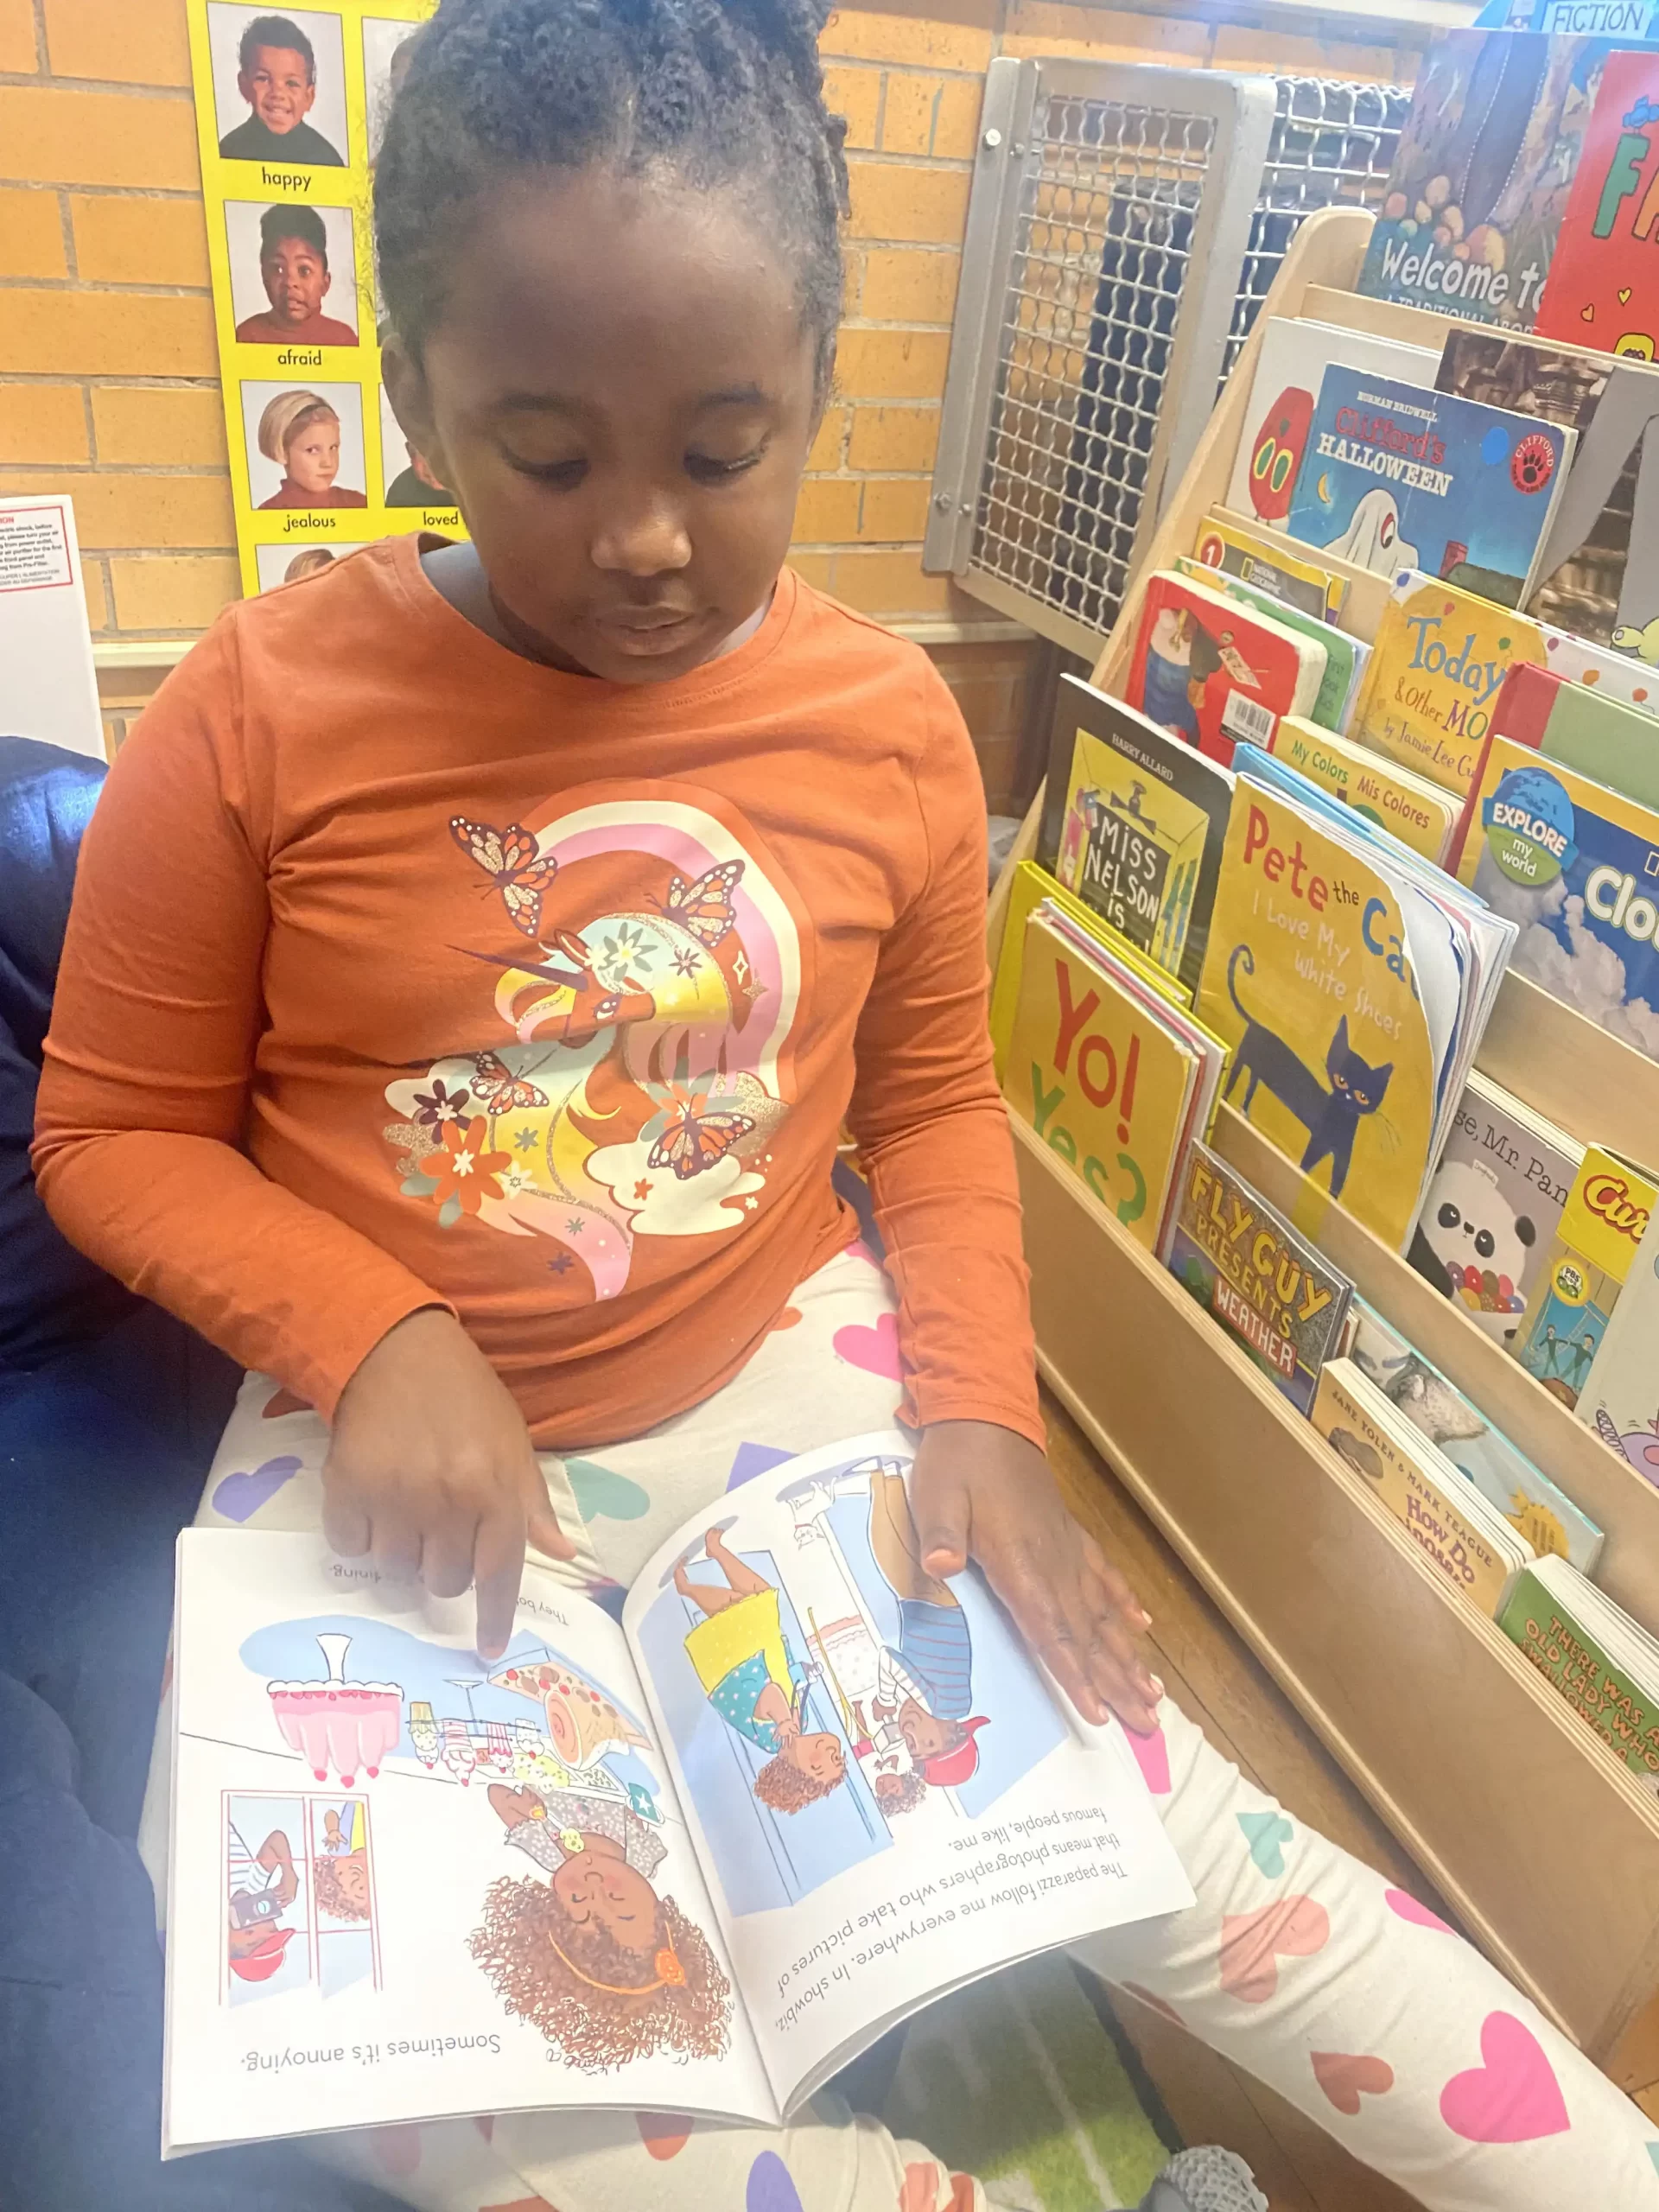 girl wearing an orange shirt reading a book in her classroom.